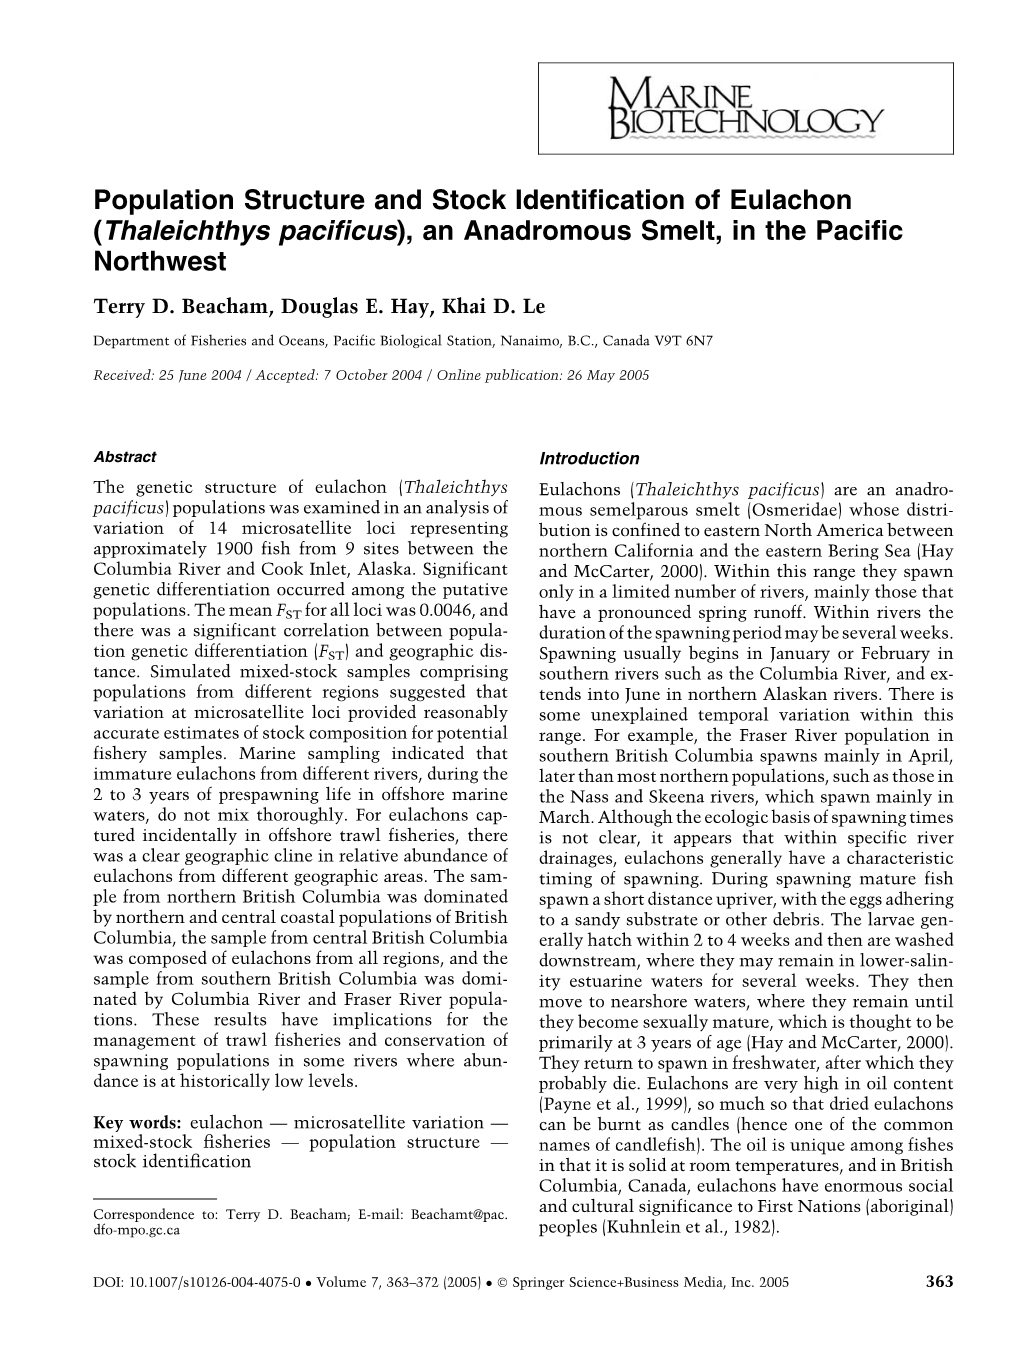 Population Structure and Stock Identification of Eulachon